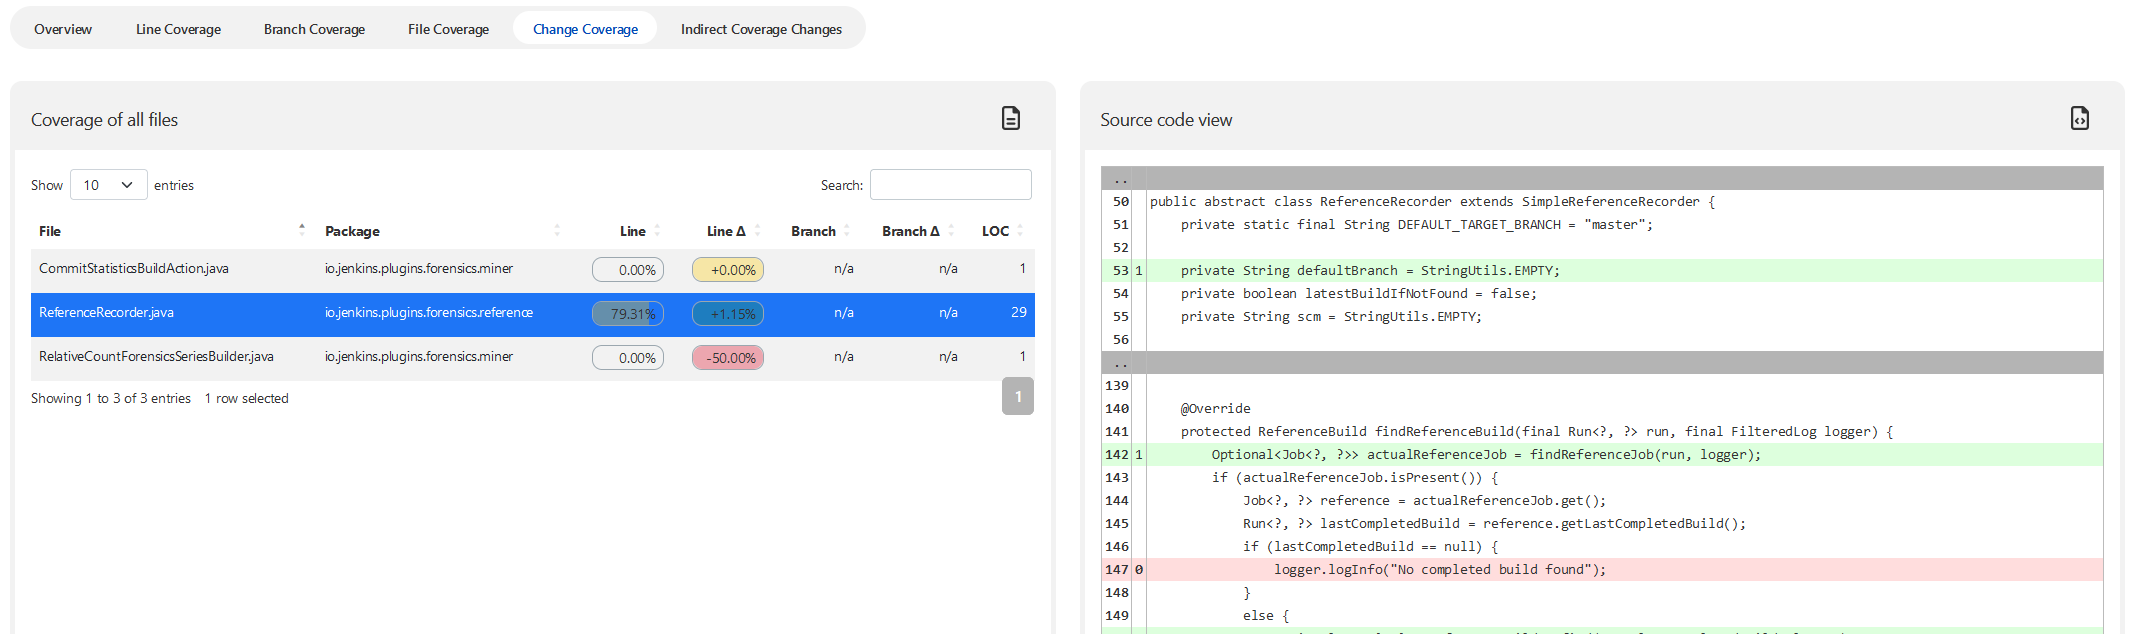 Specific source code view for Change Coverage